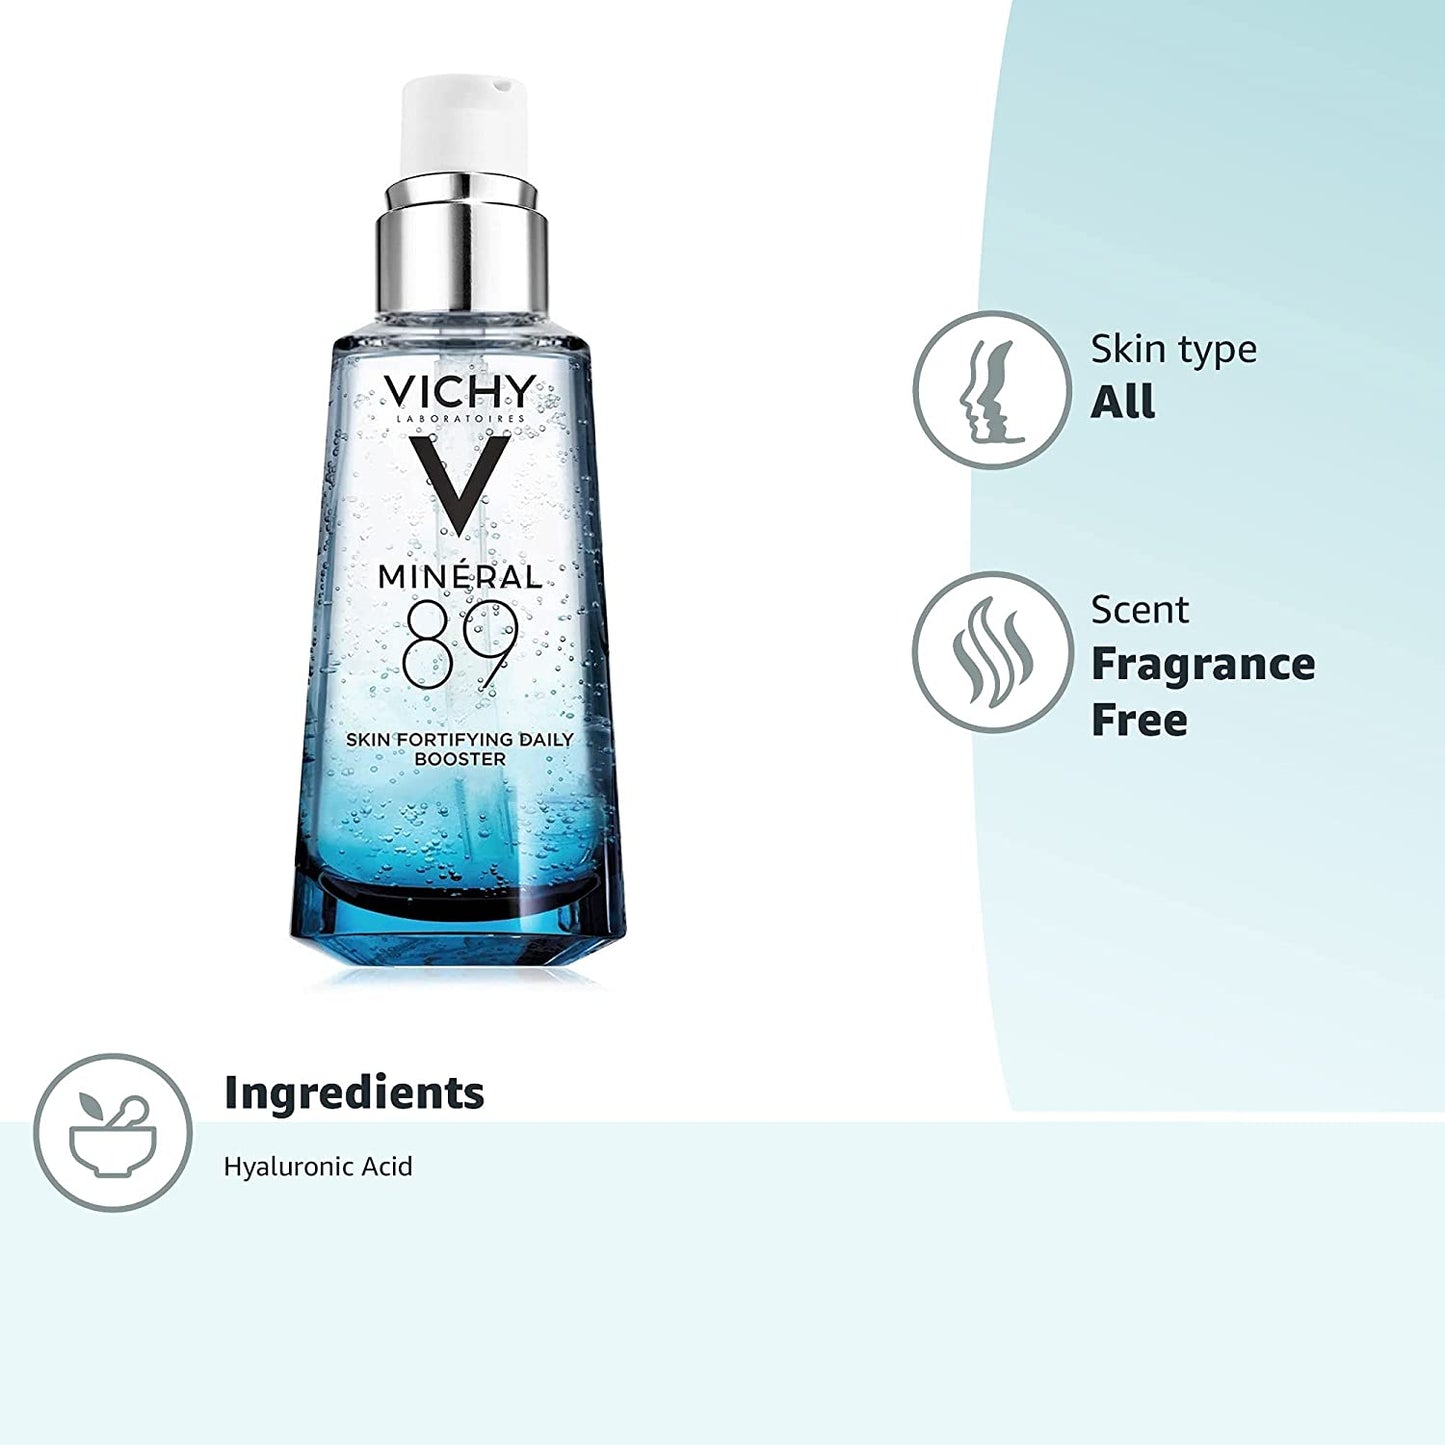 Vichy Mineral 89 Fortifying and Plumping Daily Booster Skin Care, 1.69 oz